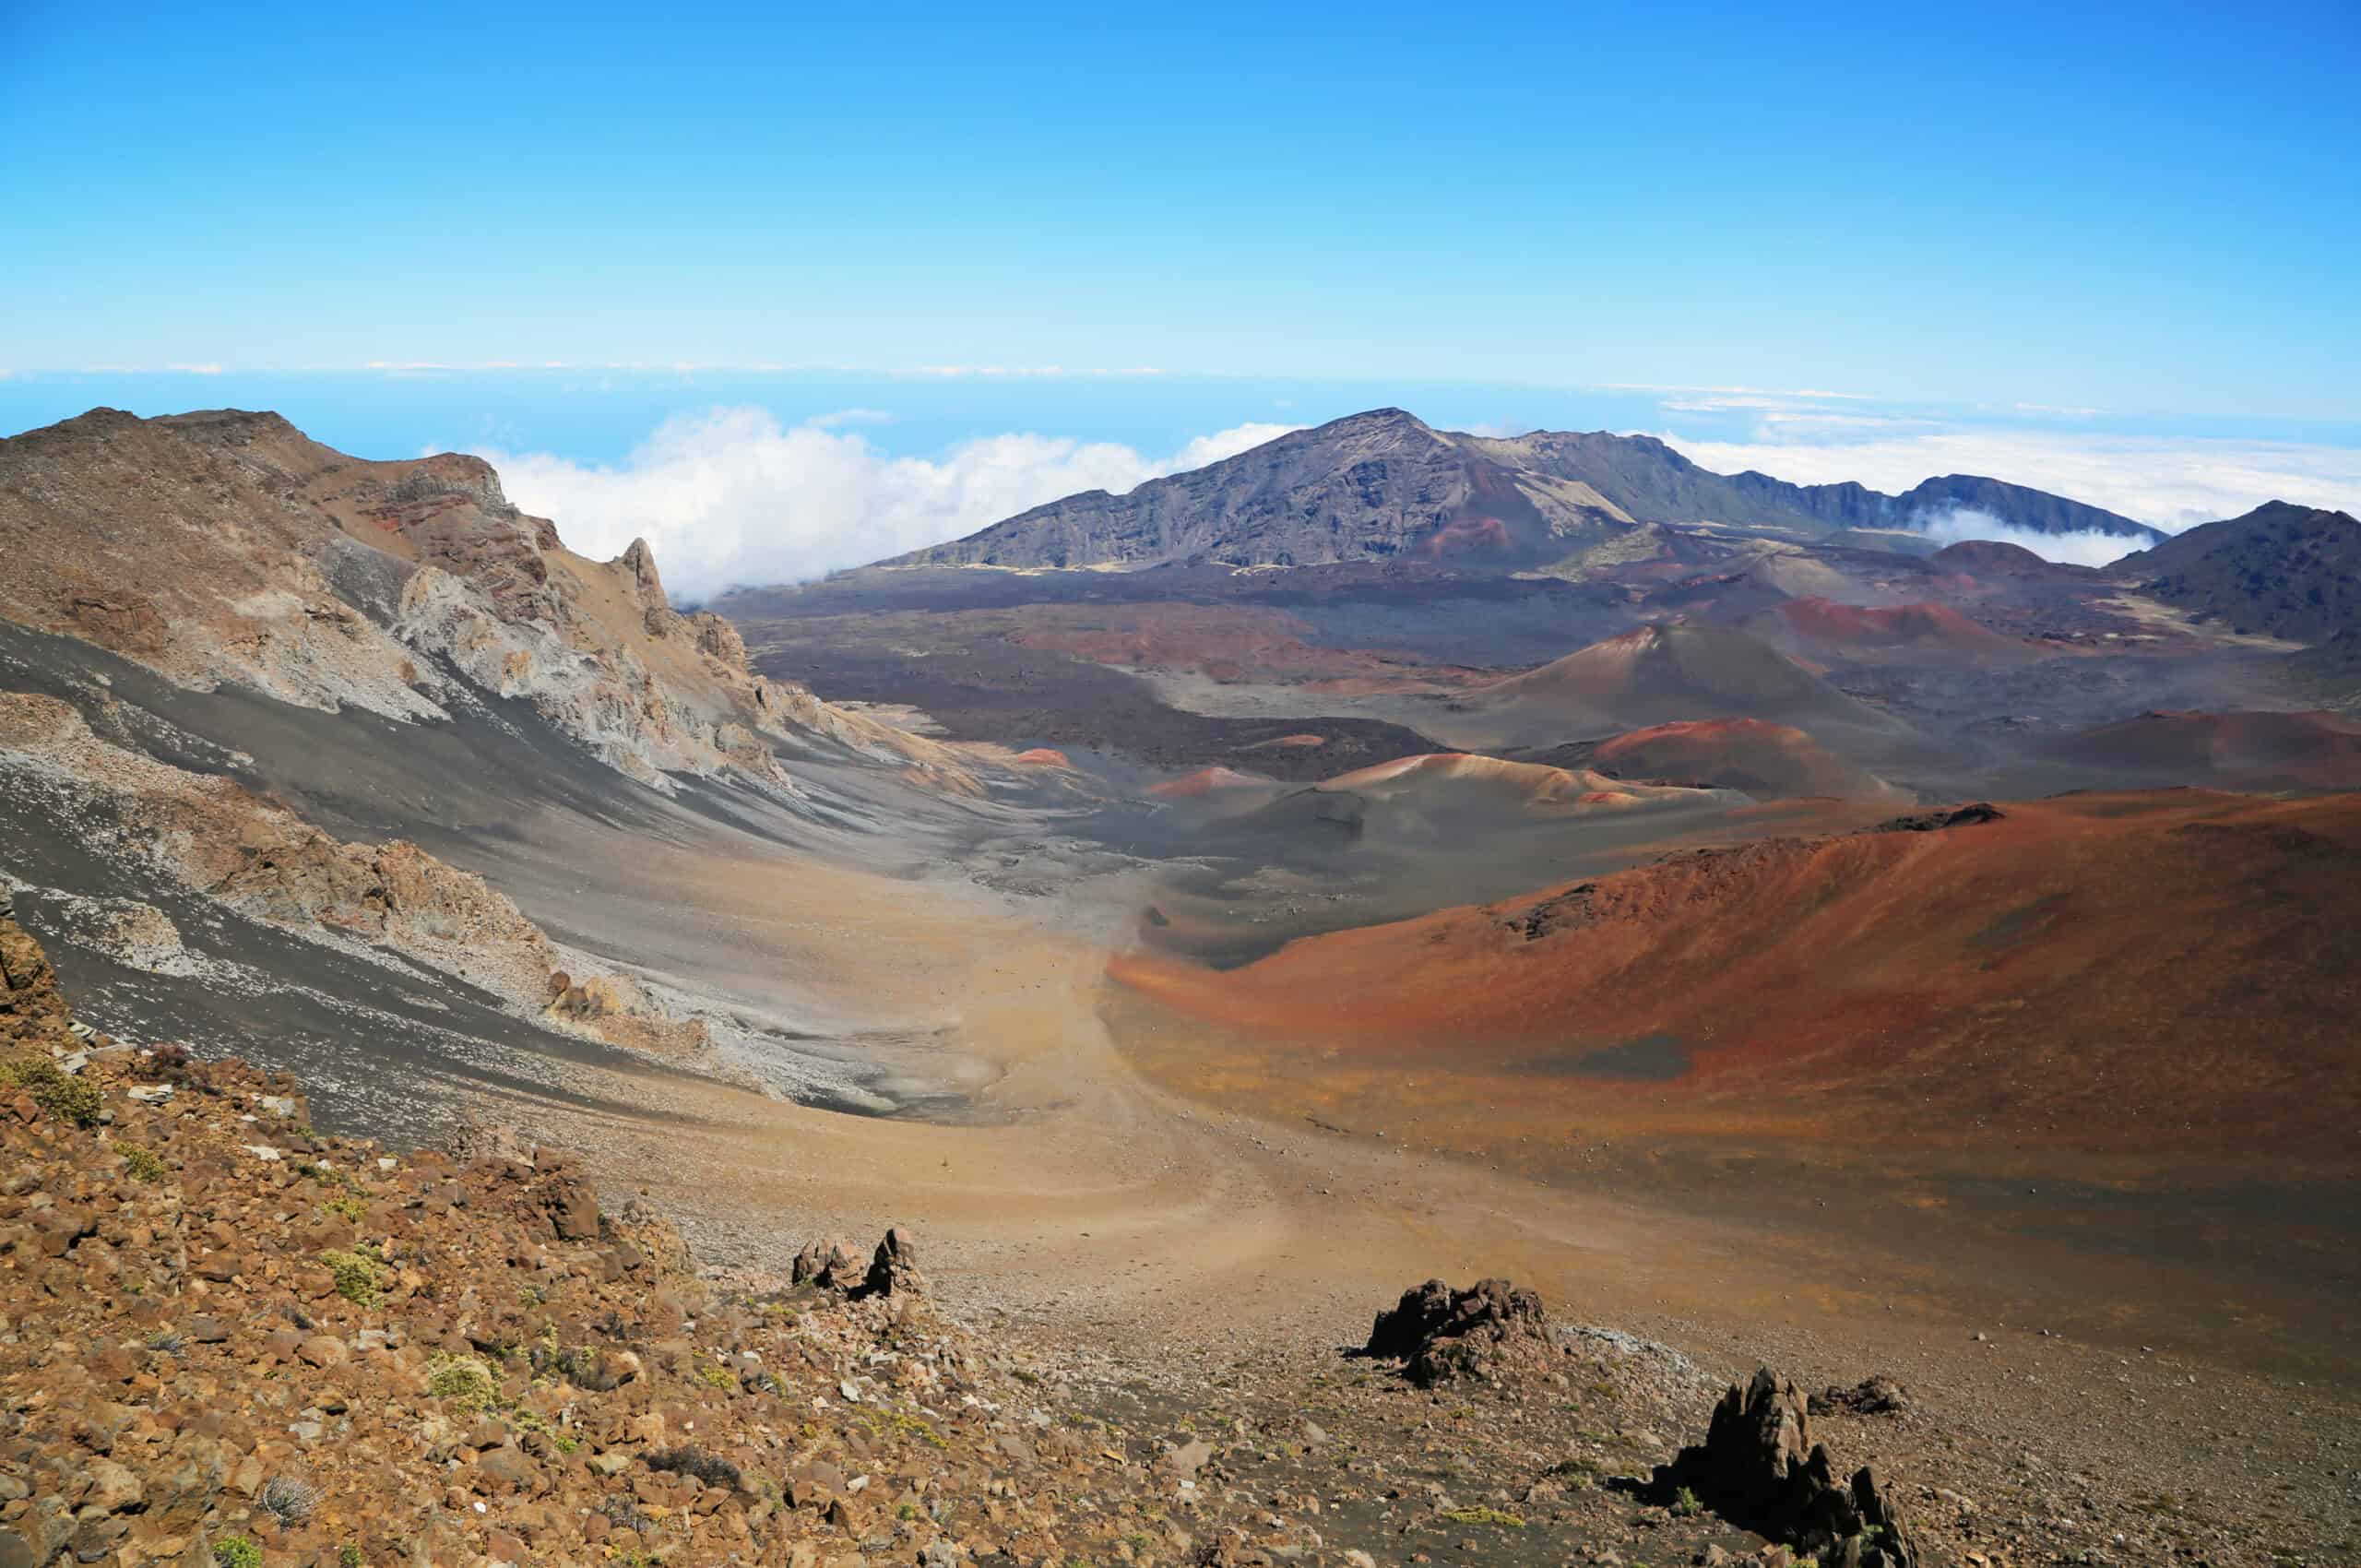 <p>Haleakalā National Park on Maui is renowned for its stunning sunrises, dramatic volcanic landscapes, and diverse ecosystems. The park features the massive Haleakalā Crater, a dormant volcano rising over 10,000 feet, offering imposing views and distinctive geological formations. </p> <p>While the park’s beauty is undeniable, it presents significant hazards like challenging hikes, sudden weather changes, and high altitudes that can cause sickness. Visitors are drawn to its awe-inspiring scenery but must be well-prepared to safely navigate its rugged and variable conditions.</p>